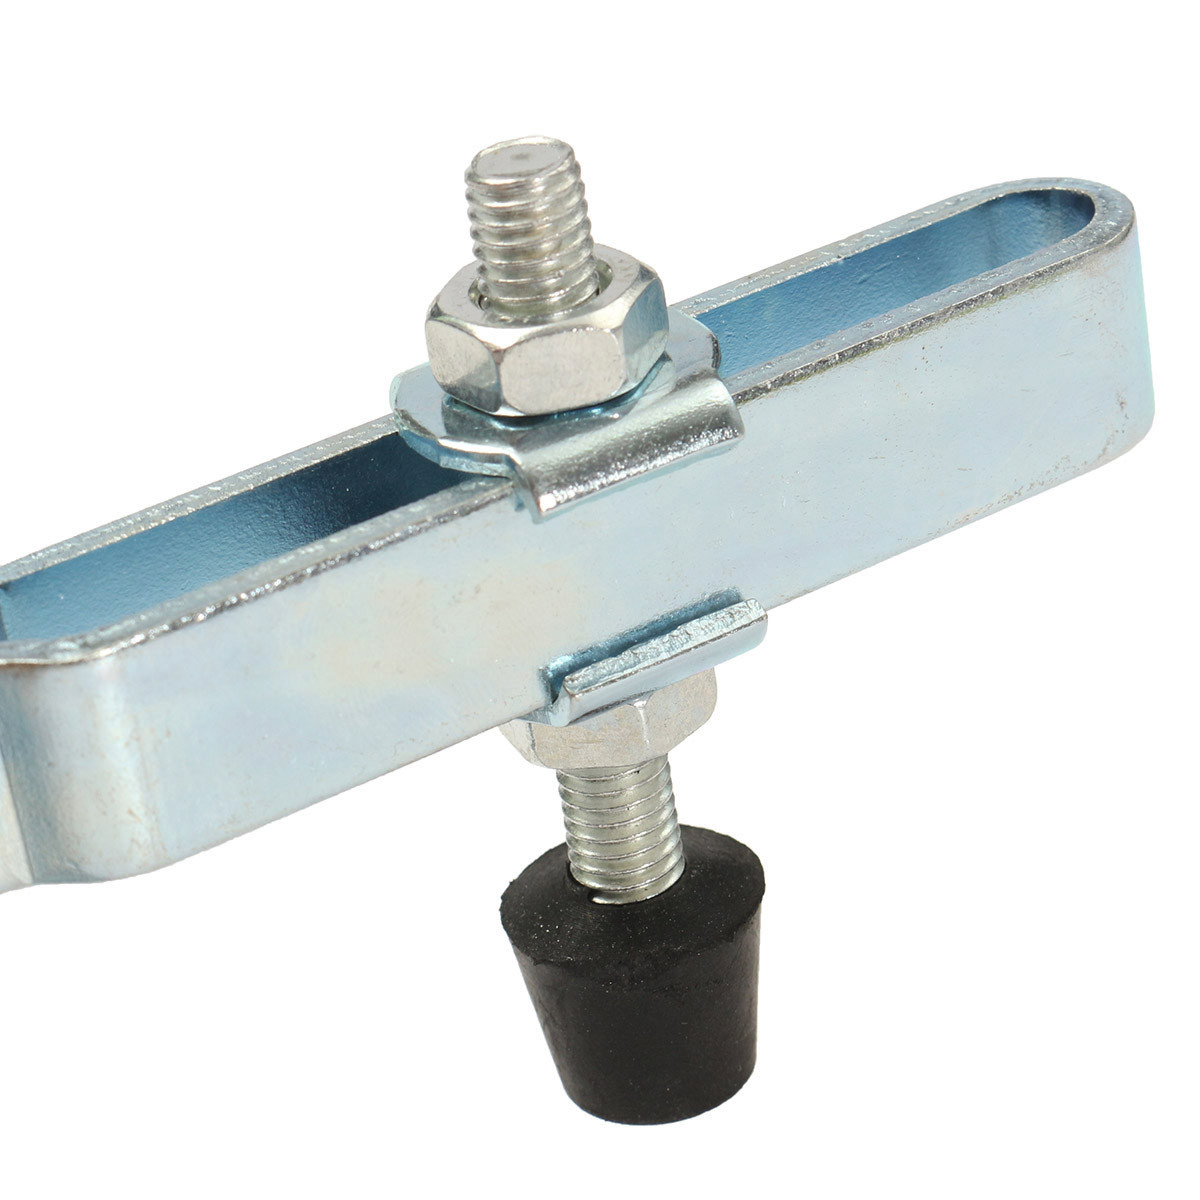 227KG-Holding-Capacity-Quick-Release-U-Bar-Hand-Tool-Vertical-Type-Toggle-Clamp-1103853-6